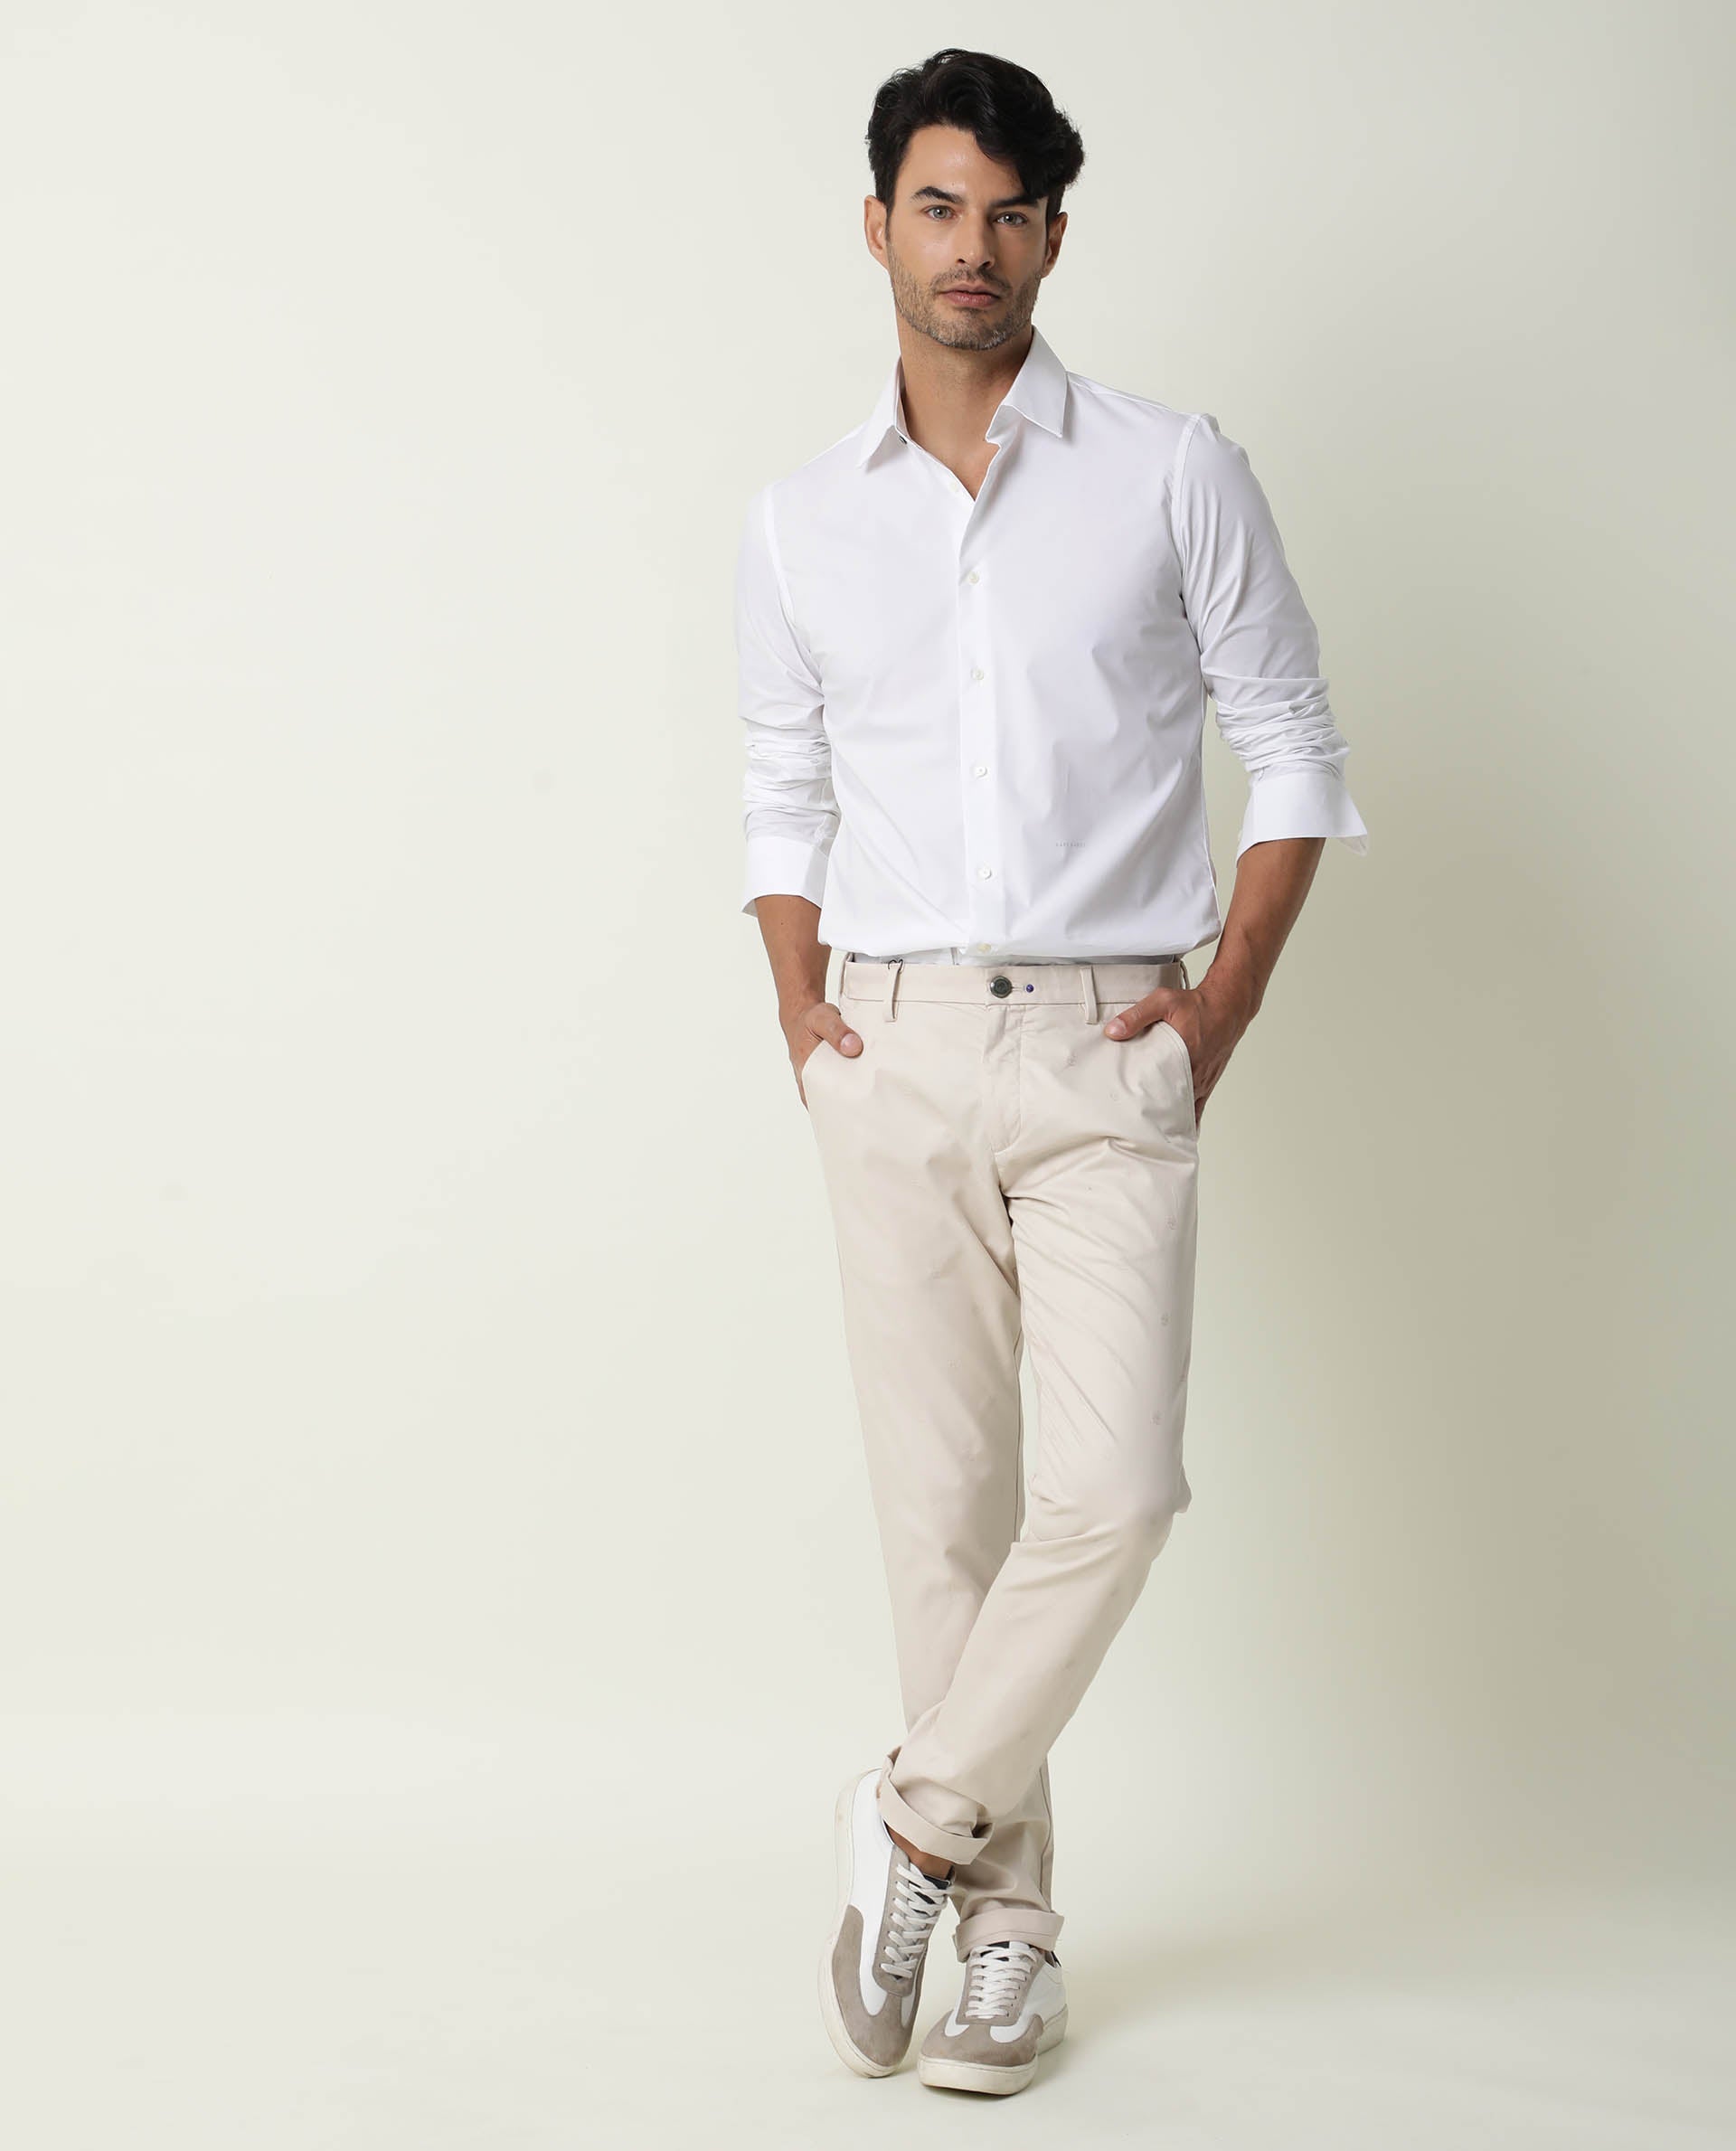 12 Best White Pants Outfits For Men To Wear in Every Occasions